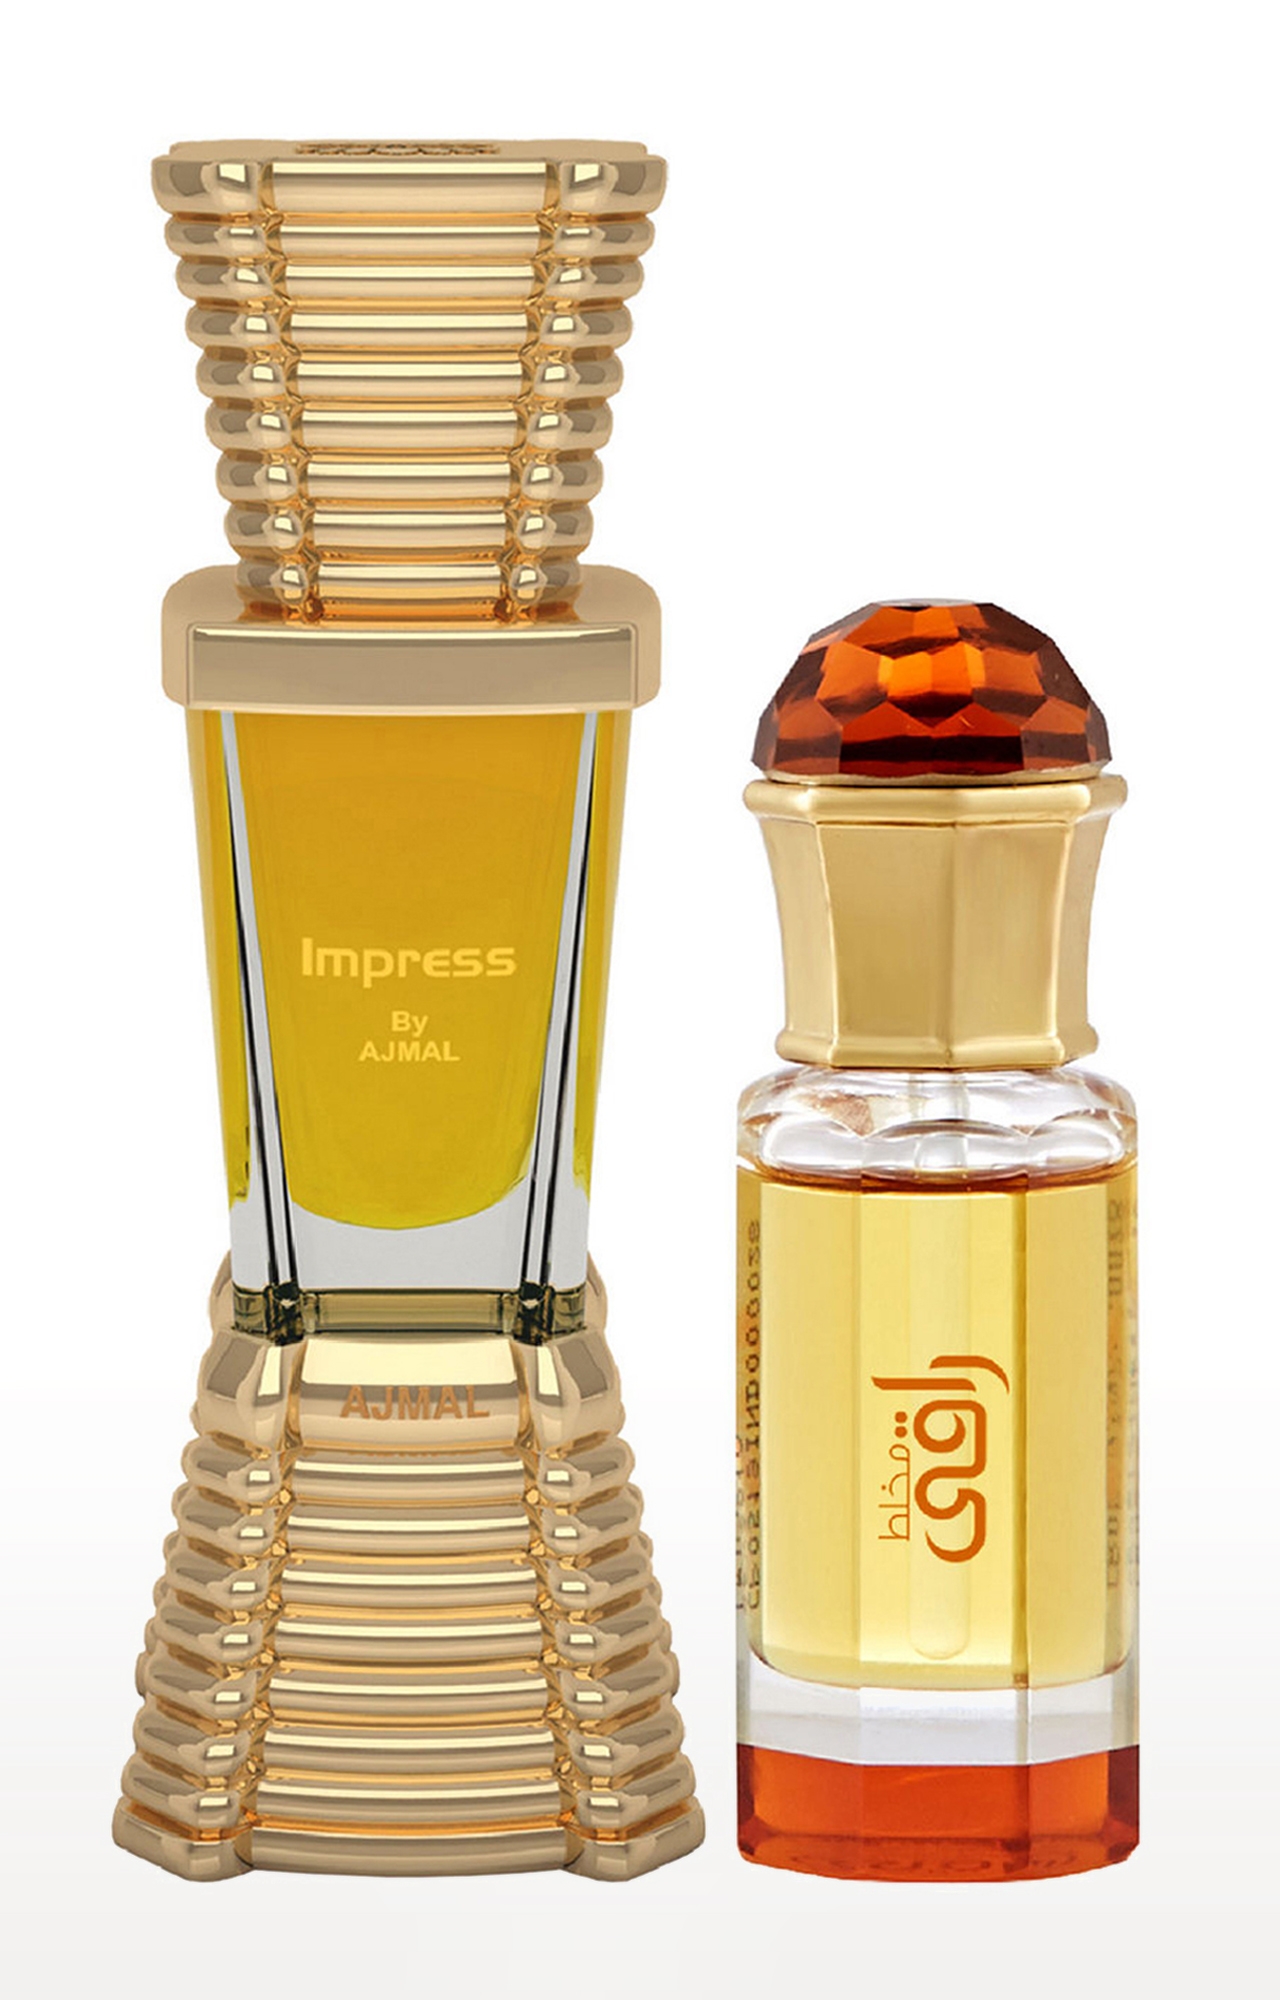 Ajmal | Ajmal Impress Concentrated Perfume Oil Alcohol-free Attar 10ml for Men and Mukhallat Raaqi Concentrated Perfume Oil Alcohol-free Attar 10ml for Unisex 0